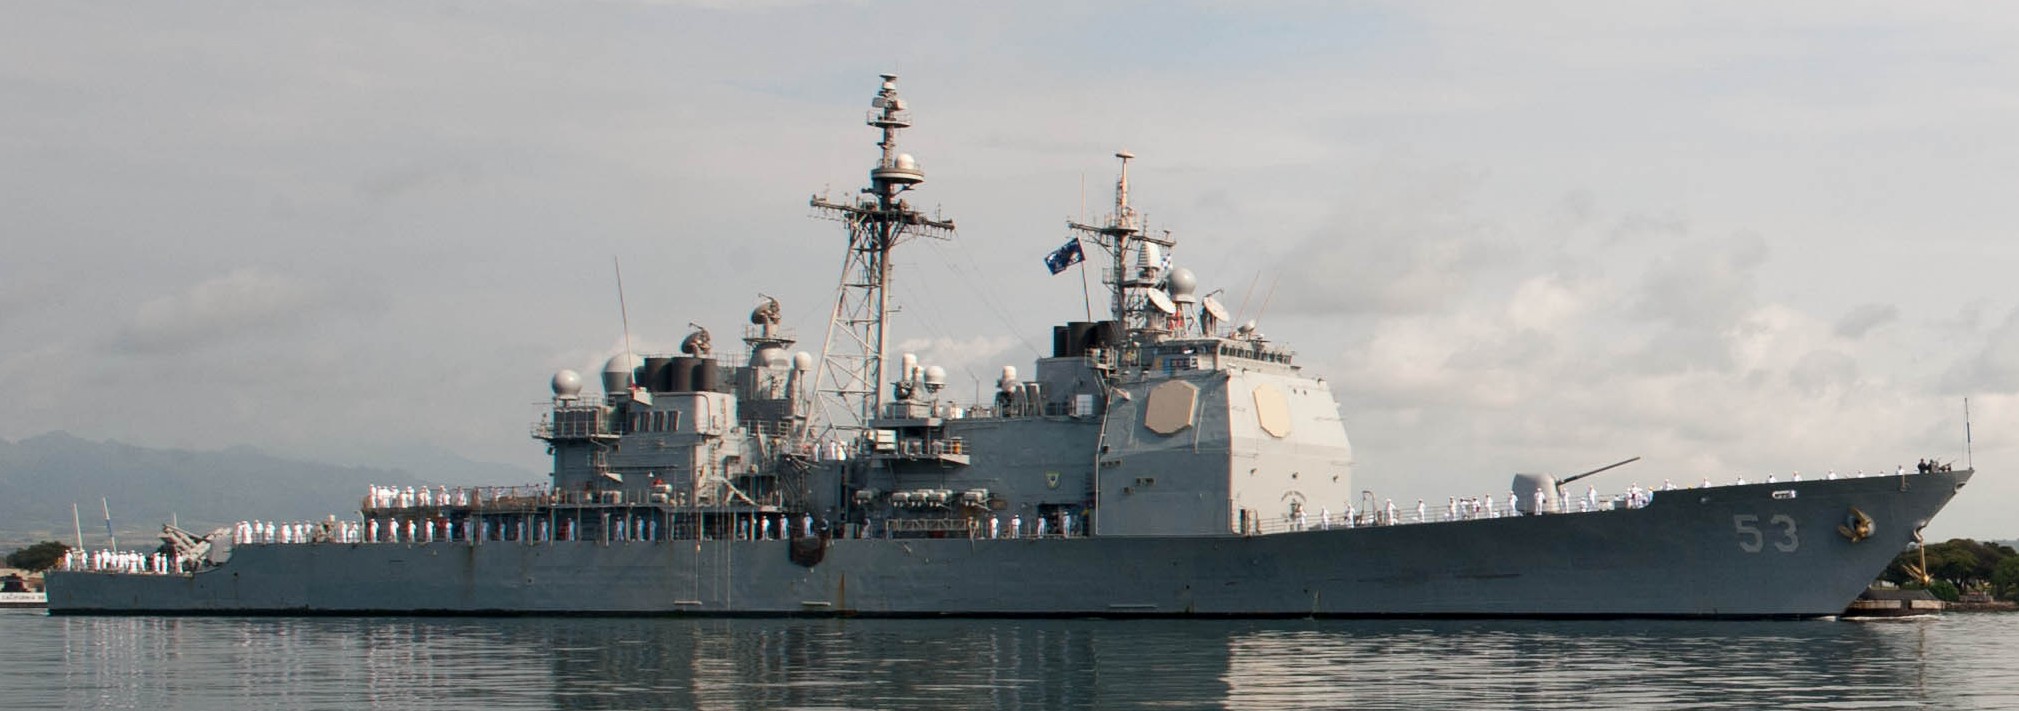 cg-53 uss mobile bay ticonderoga class guided missile cruiser aegis us navy 75